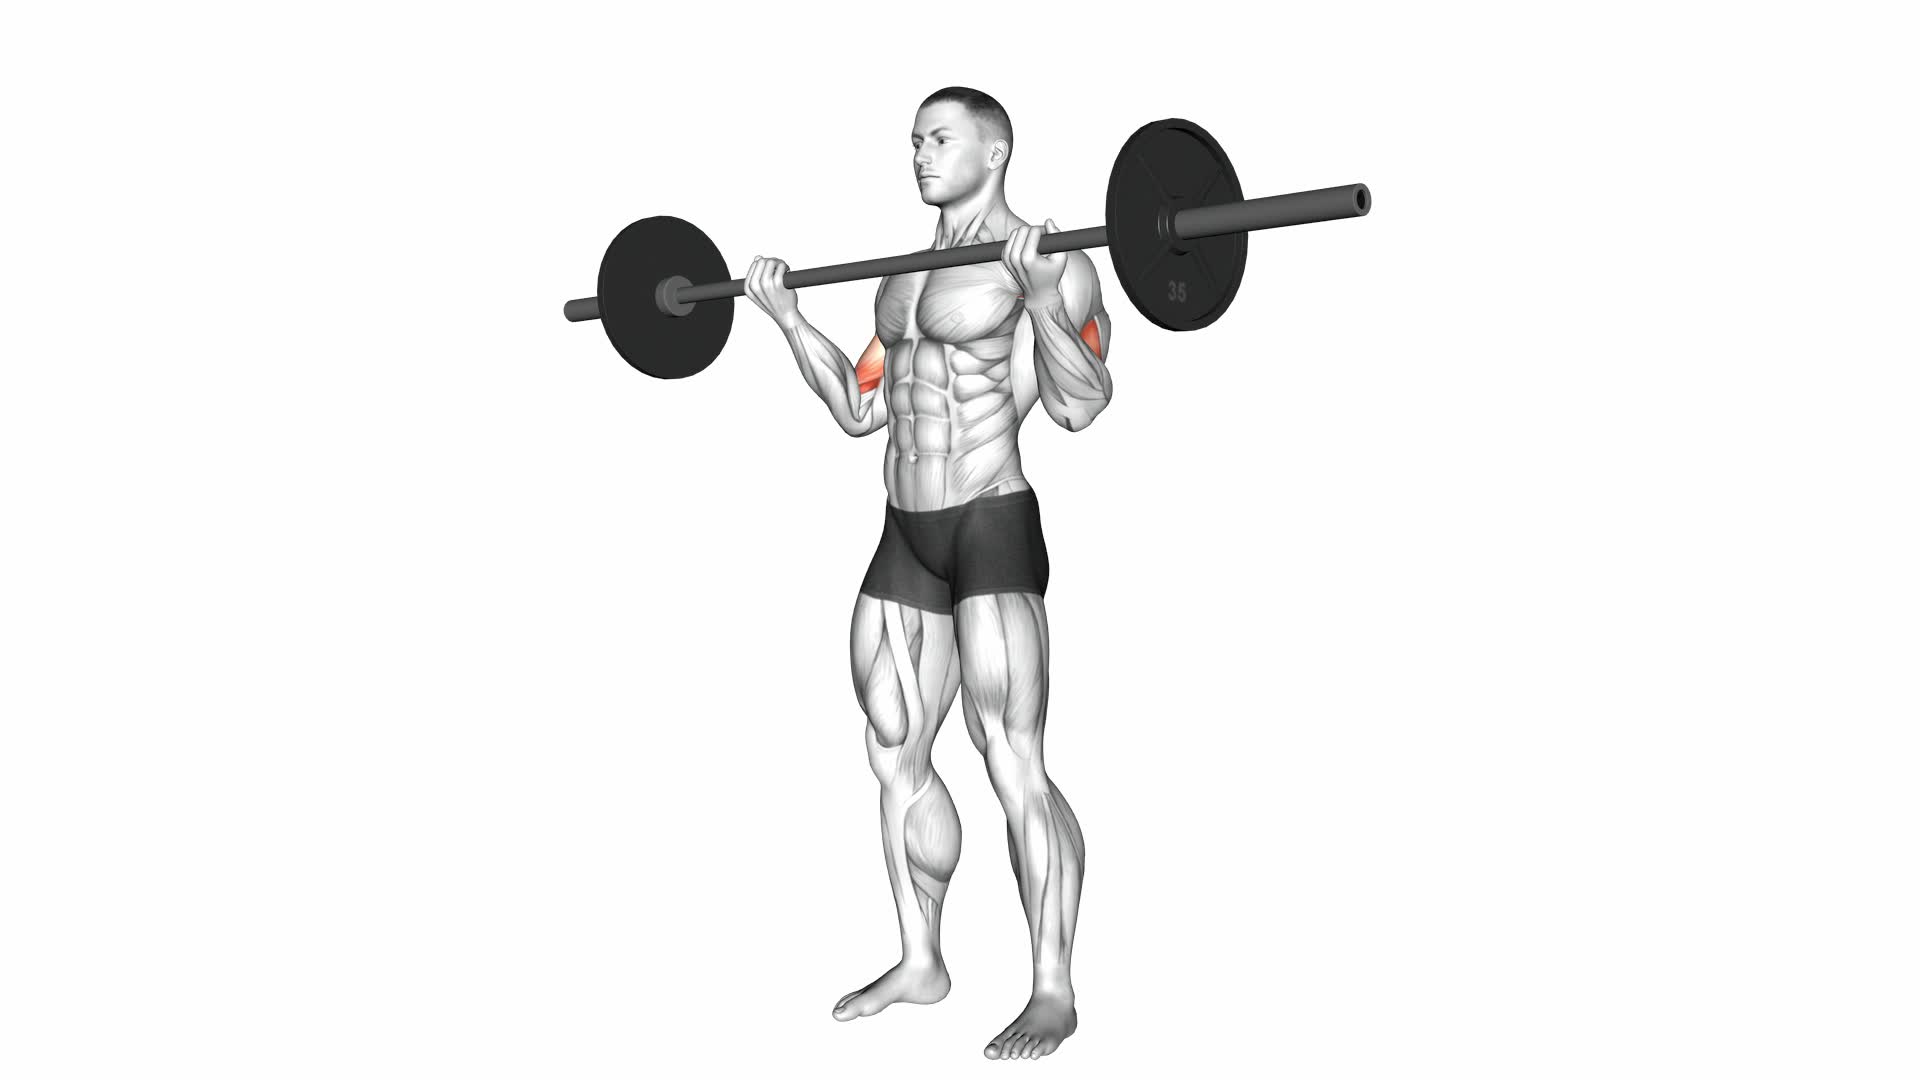 Barbell Standing Wide-grip Curl - Video Exercise Guide & Tips